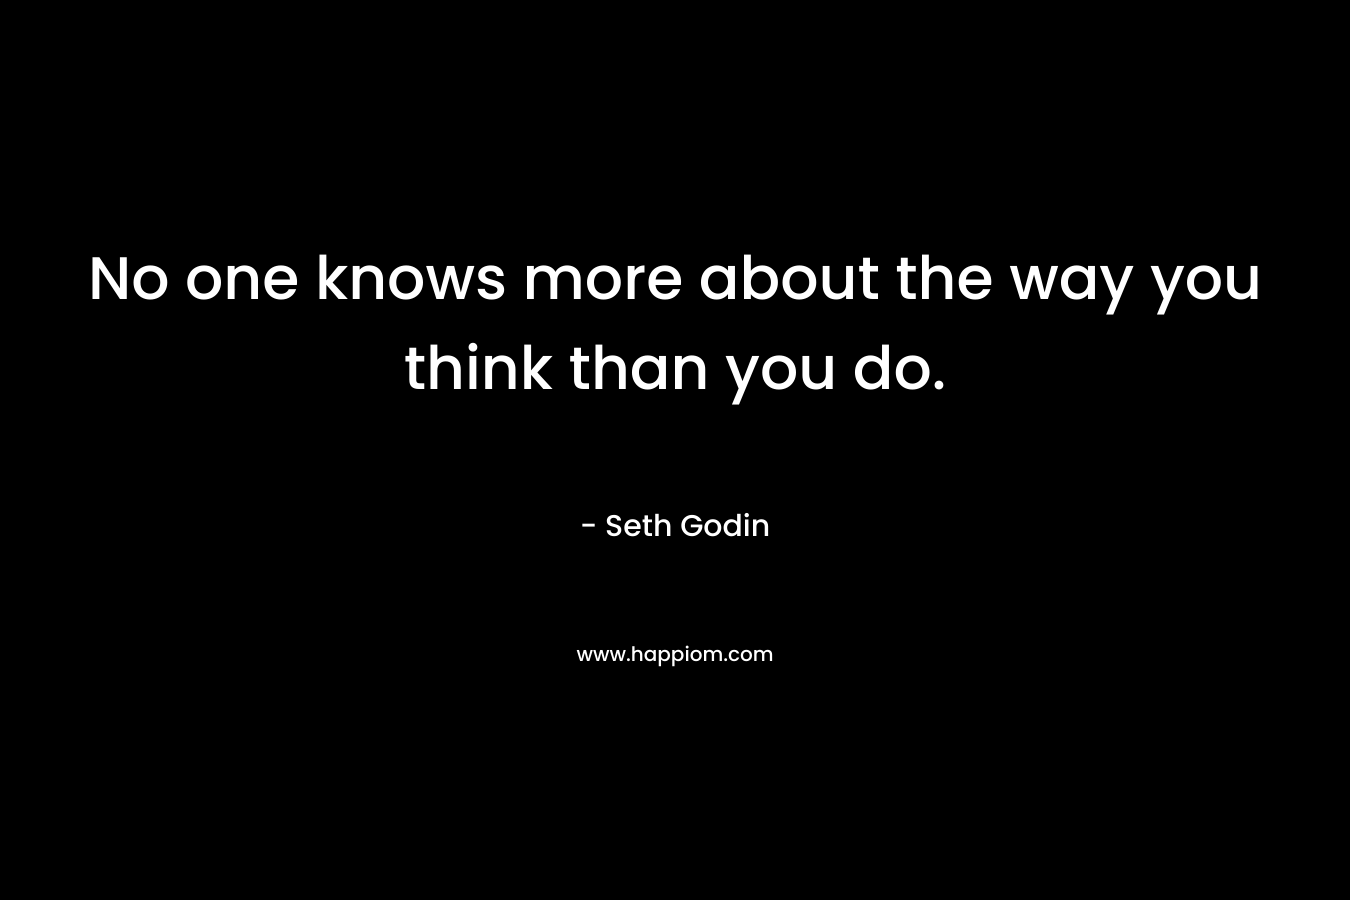 No one knows more about the way you think than you do.